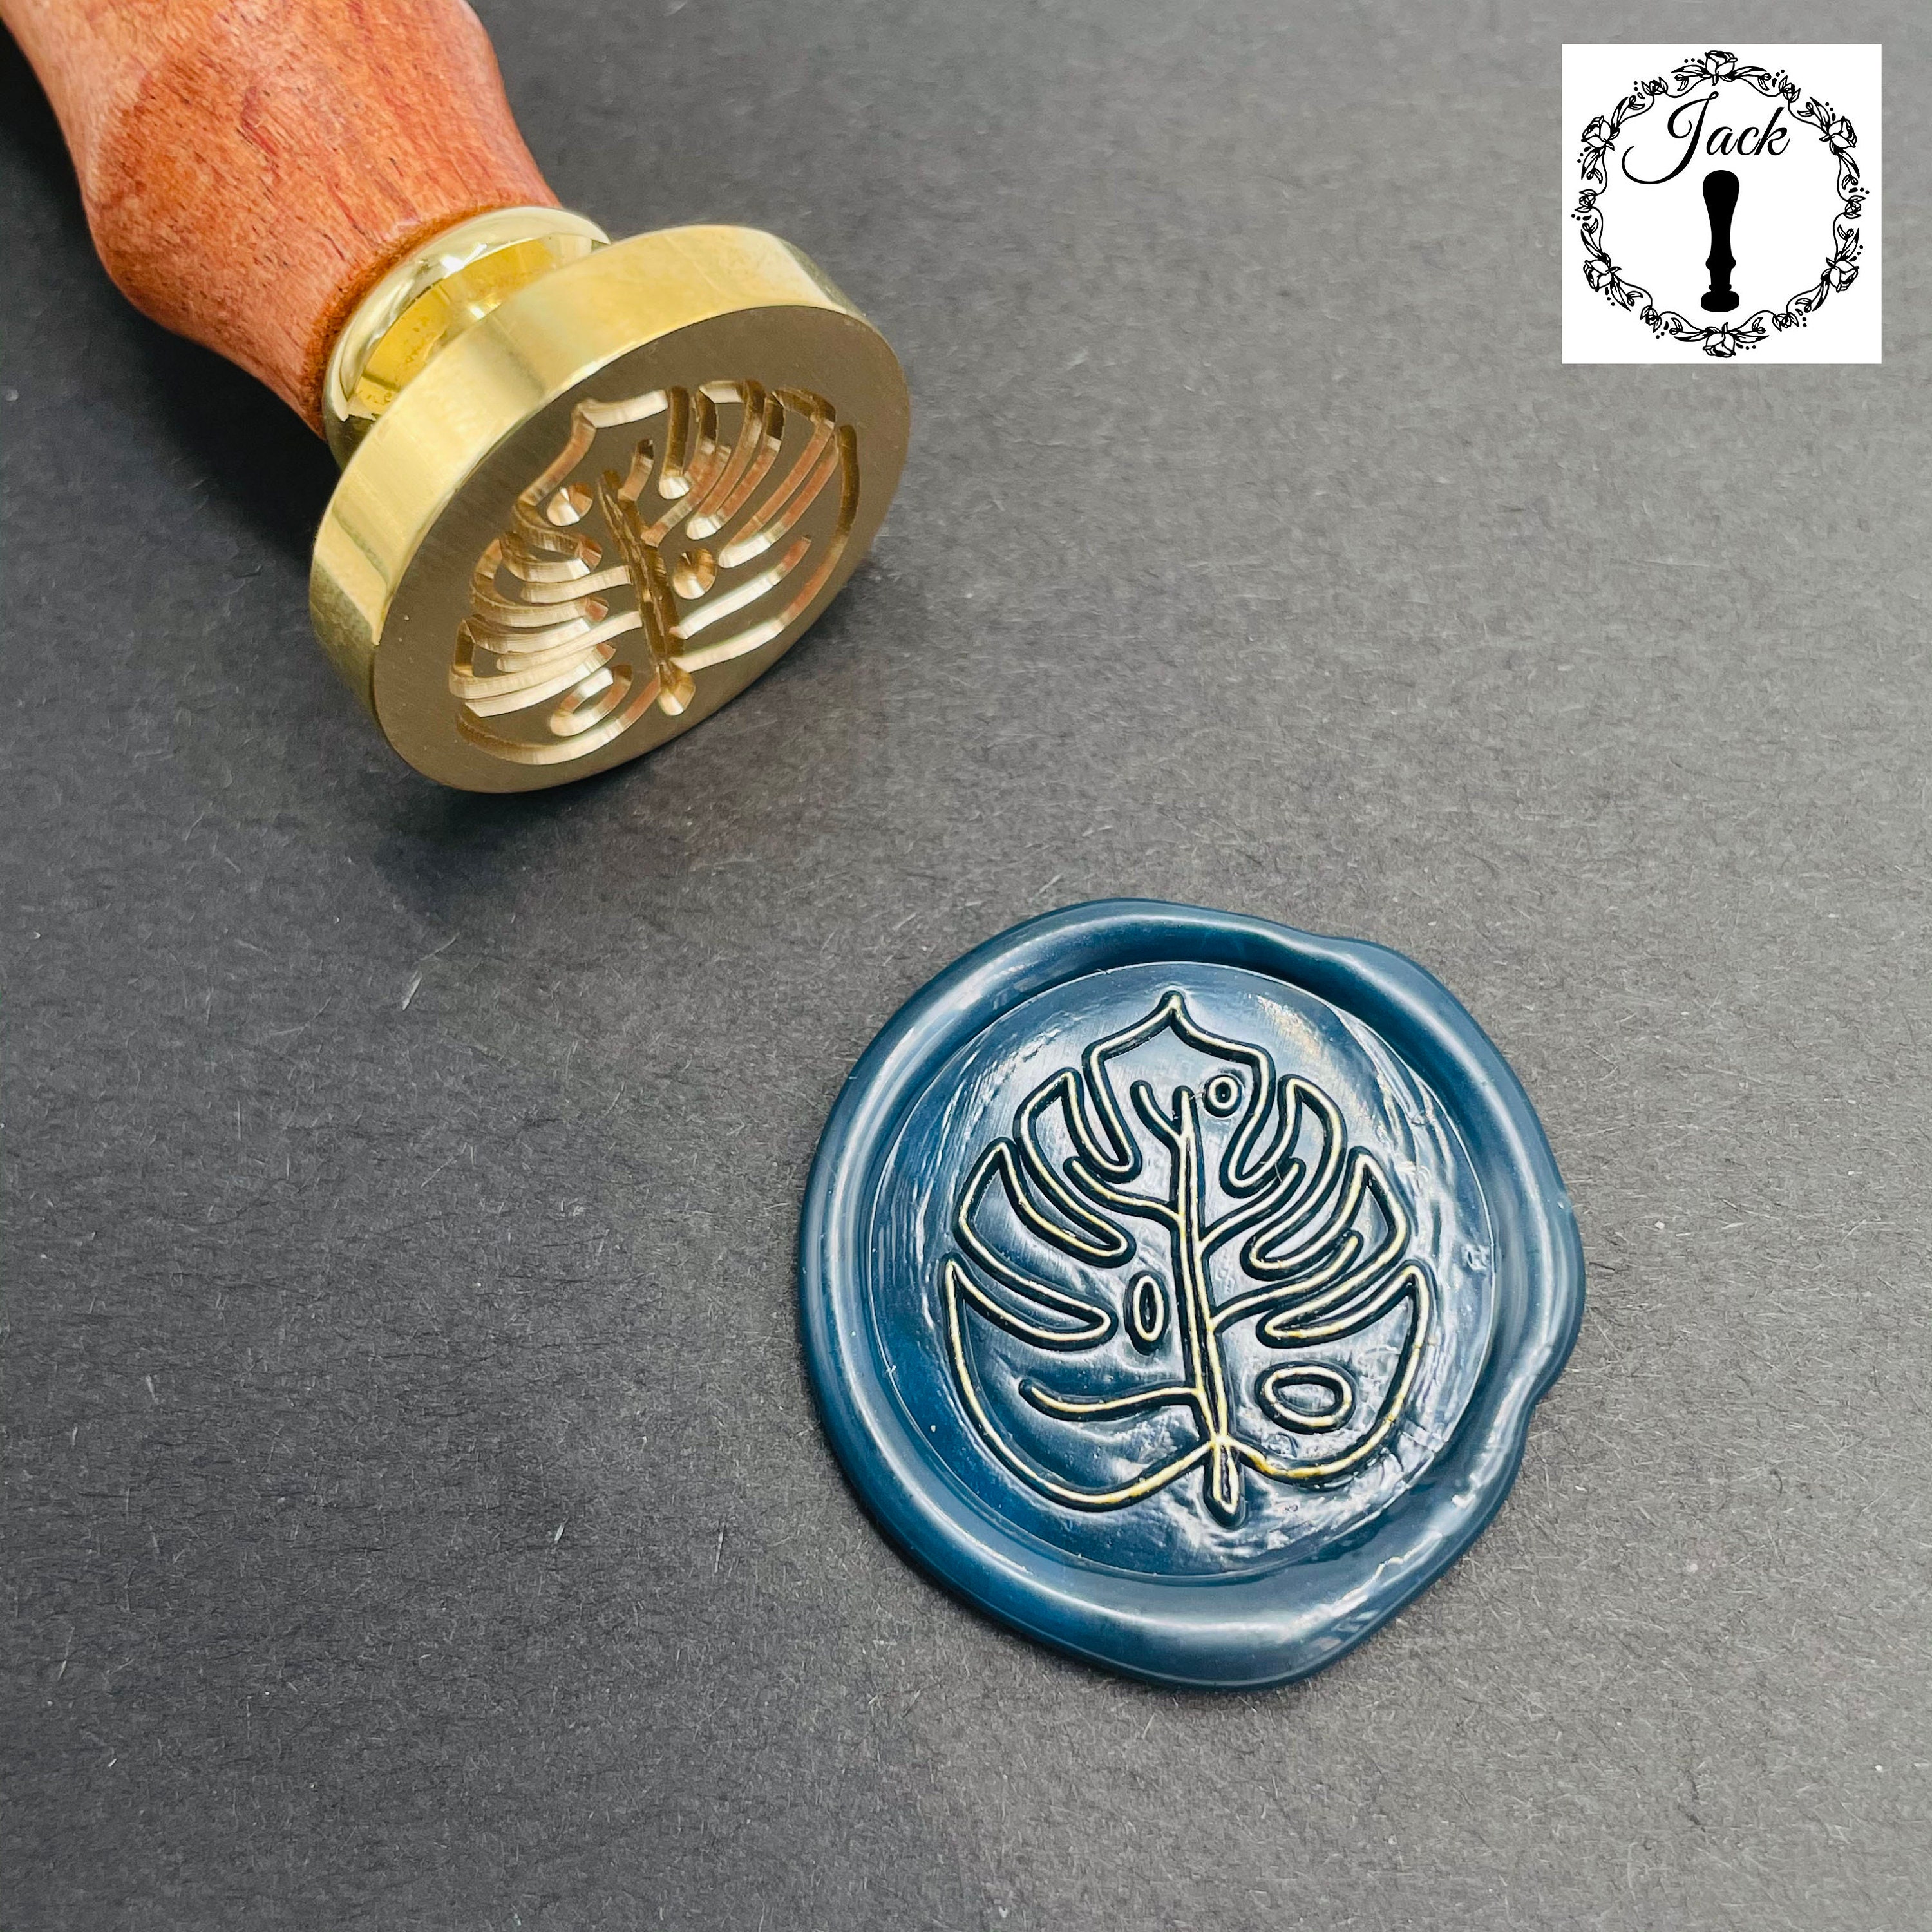 Hoppler Set of Two 1.2in Cavity Silicone Wax Stamp Kit Mats for Wax Seal Stamp - Sealing Wax Seals. Tested Size for Perfect Wax Seals.